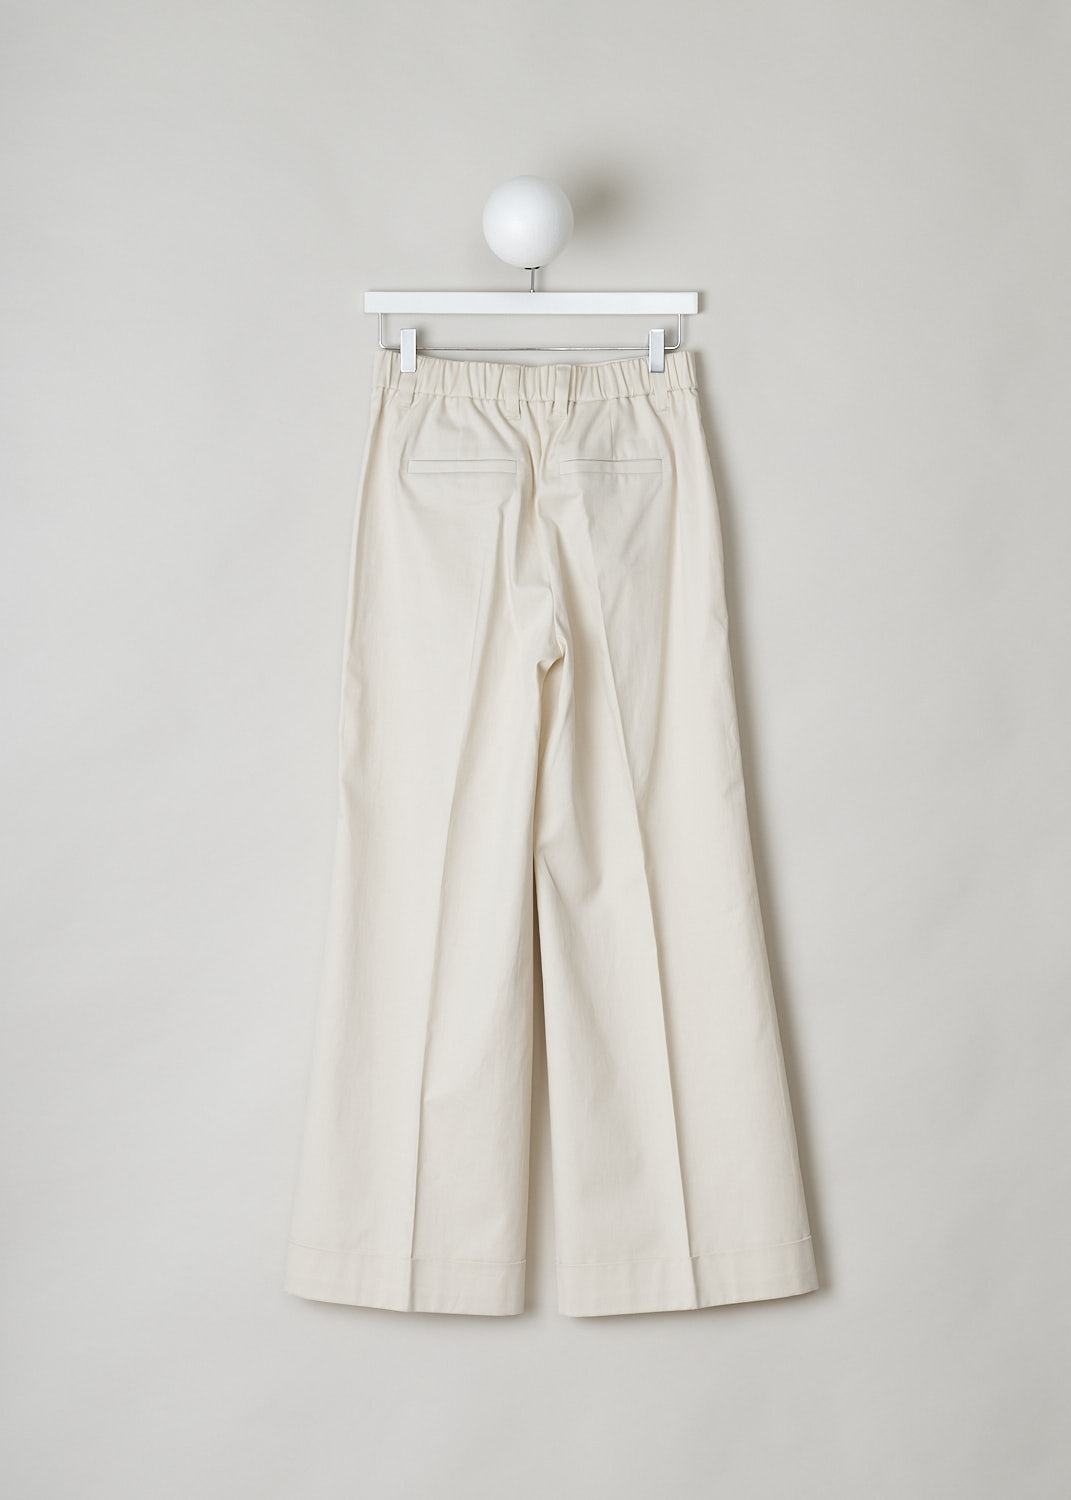 BRUNELLO CUCINELLI, BEIGE WIDE-LEG PANTS, MA130P7008_C7365, Beige, White, Back, These beige pants have straight wider pant legs with a folded hem. The pant legs have pressed centre creases. The waistline has belt loops and is elasticated in the back. The closure option is a concealed hook and zipper. The pants have forward slanted pockets in the front and welt pockets in the back. 


